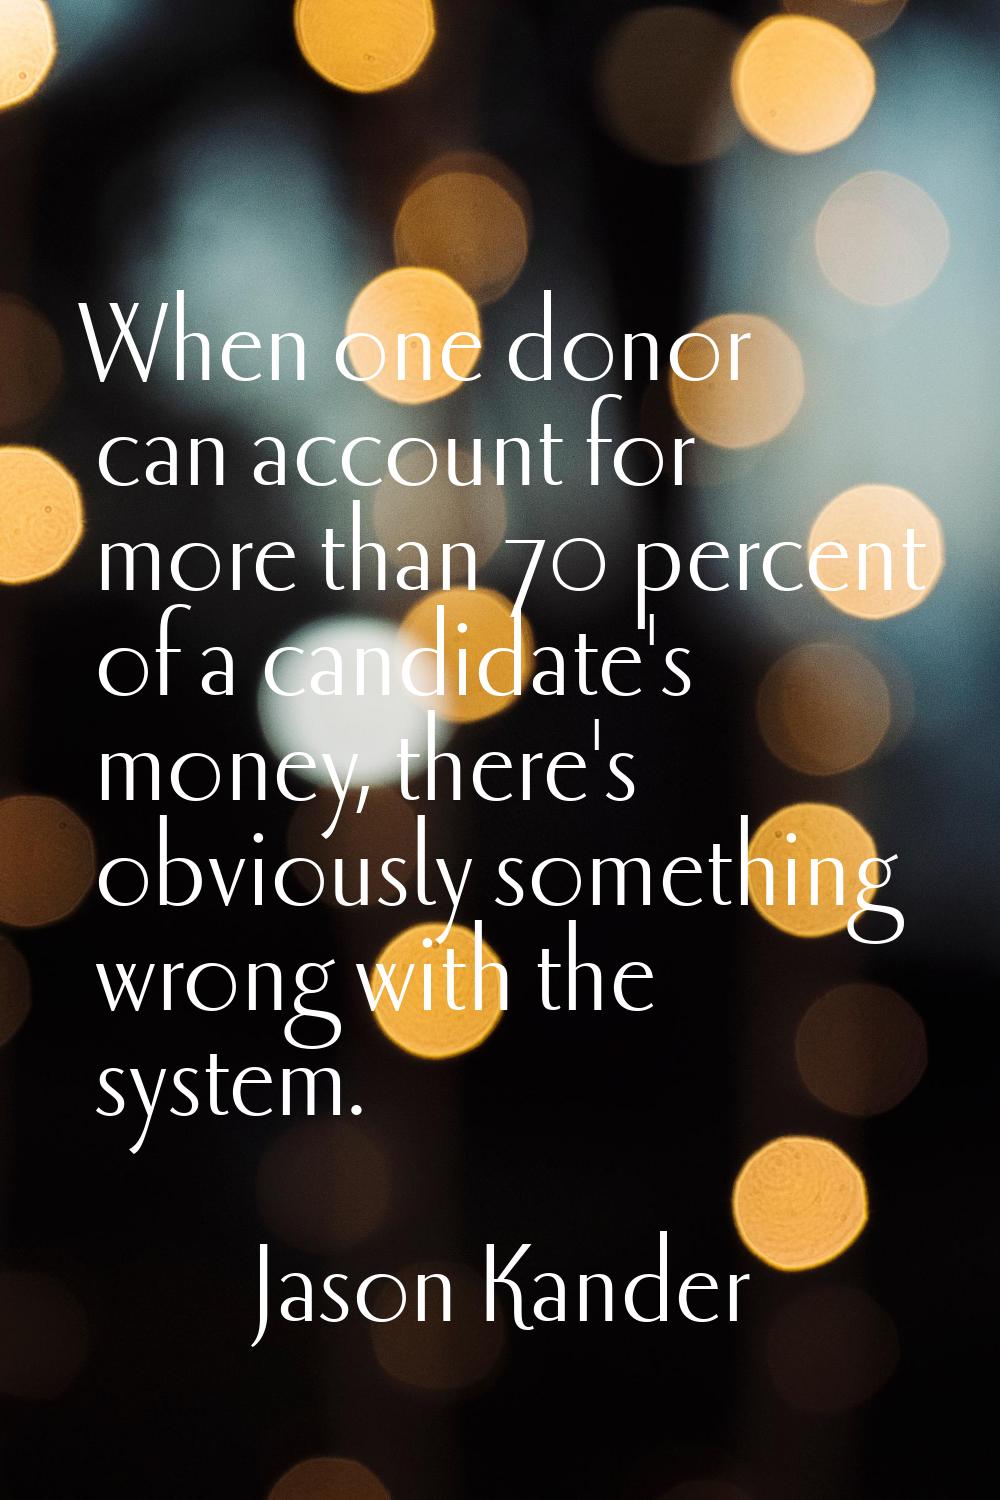 When one donor can account for more than 70 percent of a candidate's money, there's obviously somet